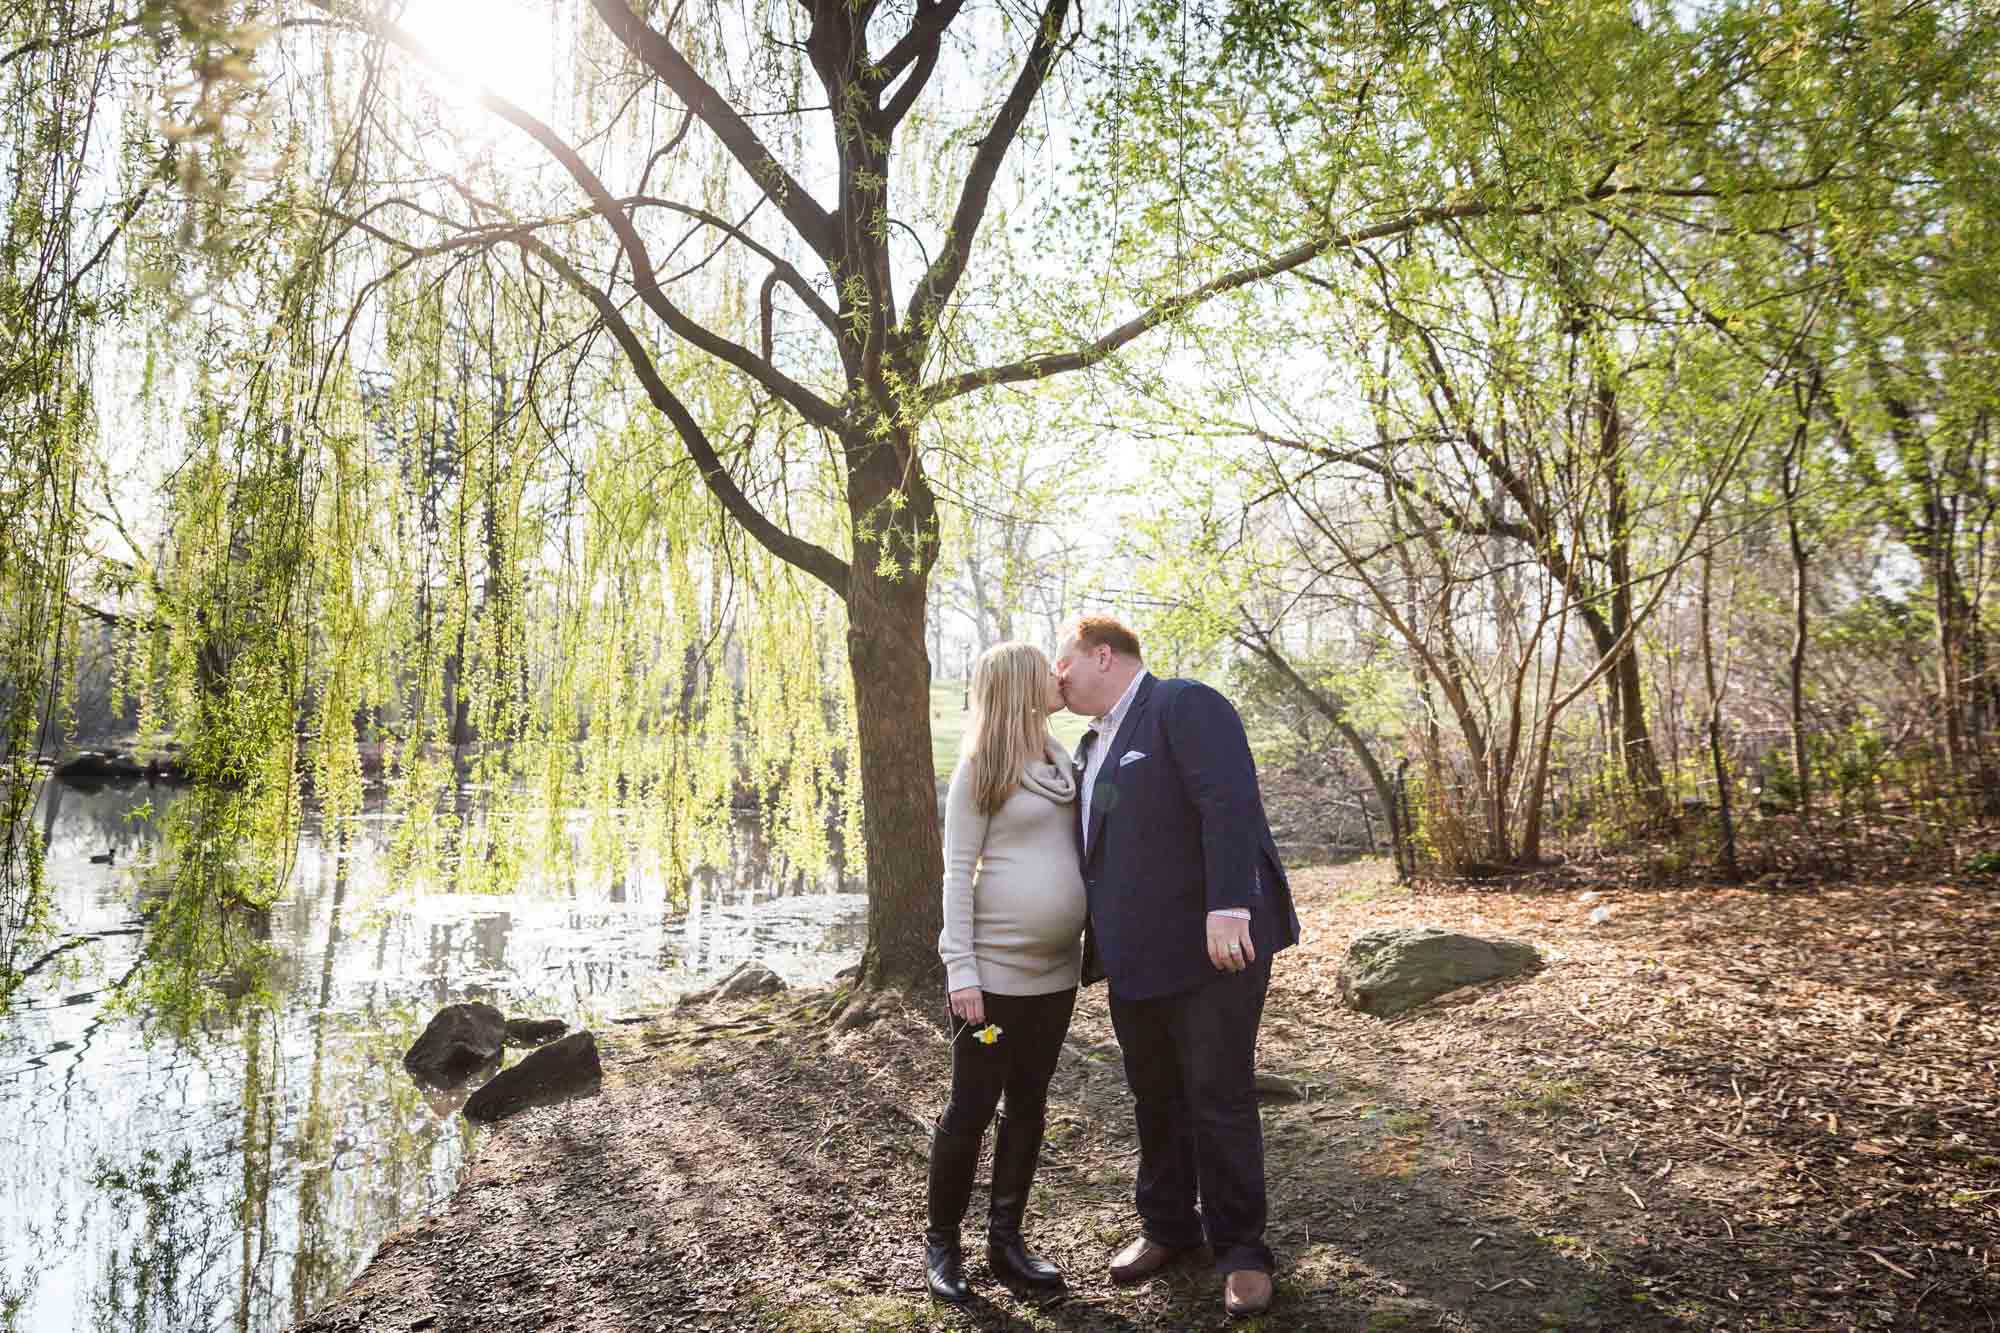 Parents kissing in park for an article on the best family portrait poses